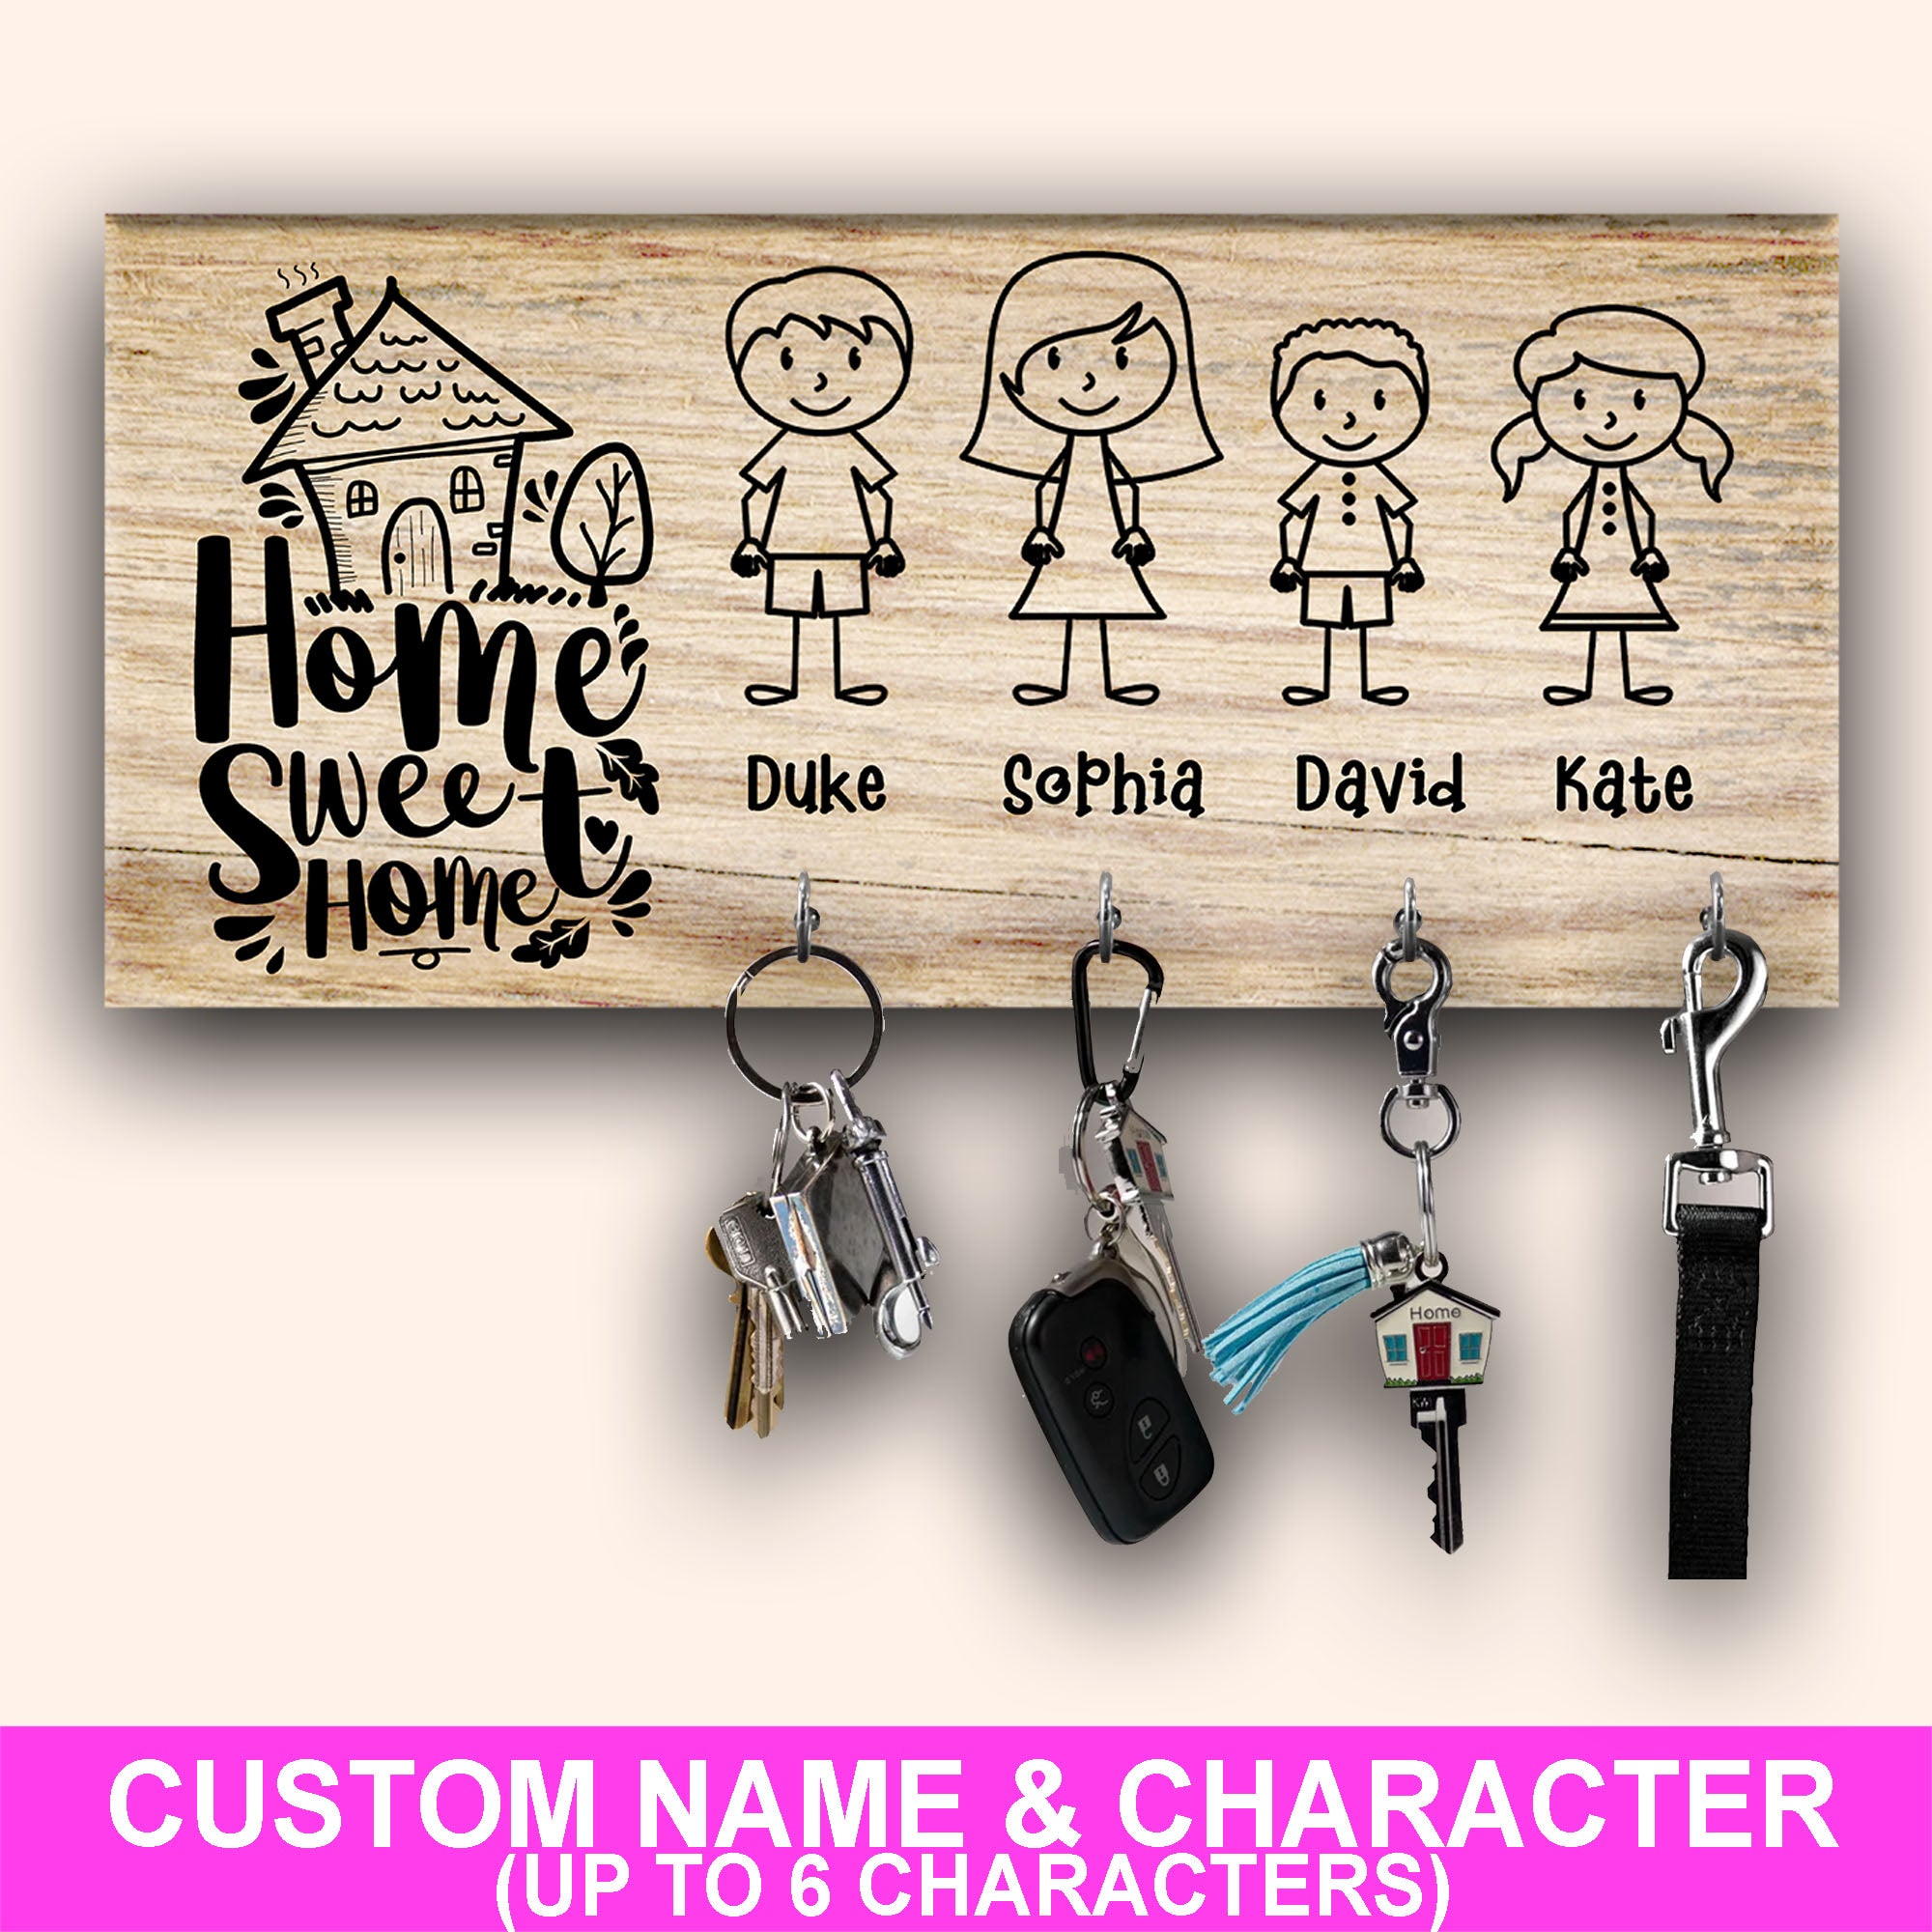 Welcome Home - Home Sweet Home - Custom Appearance And Name - Personalized Key Hanger, Key Holder - Family Gift